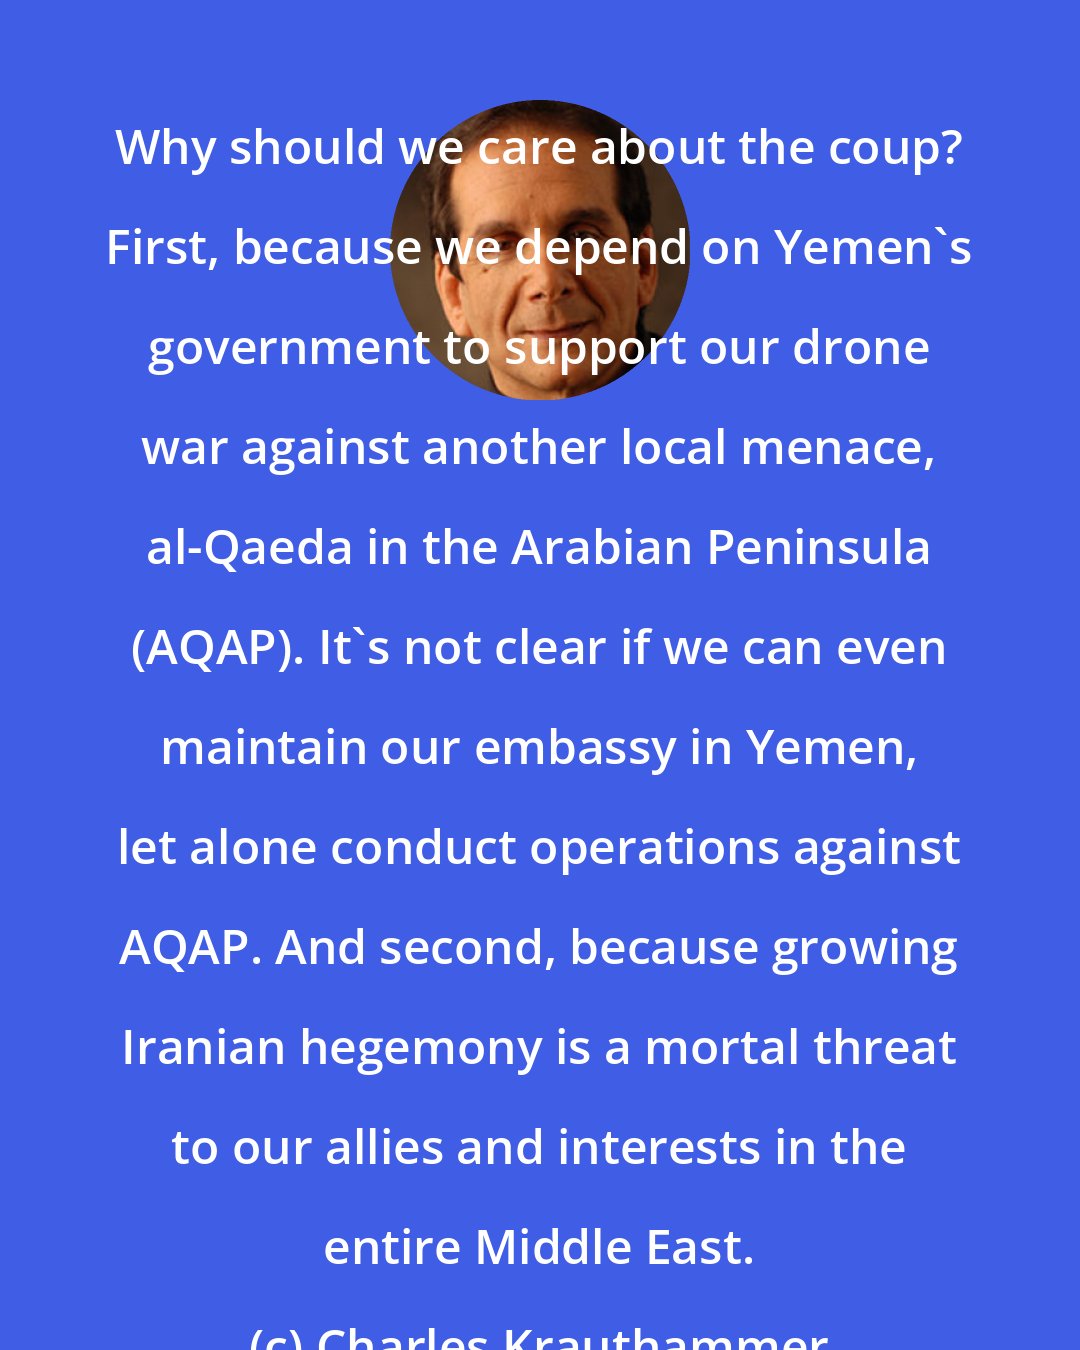 Charles Krauthammer: Why should we care about the coup? First, because we depend on Yemen's government to support our drone war against another local menace, al-Qaeda in the Arabian Peninsula (AQAP). It's not clear if we can even maintain our embassy in Yemen, let alone conduct operations against AQAP. And second, because growing Iranian hegemony is a mortal threat to our allies and interests in the entire Middle East.